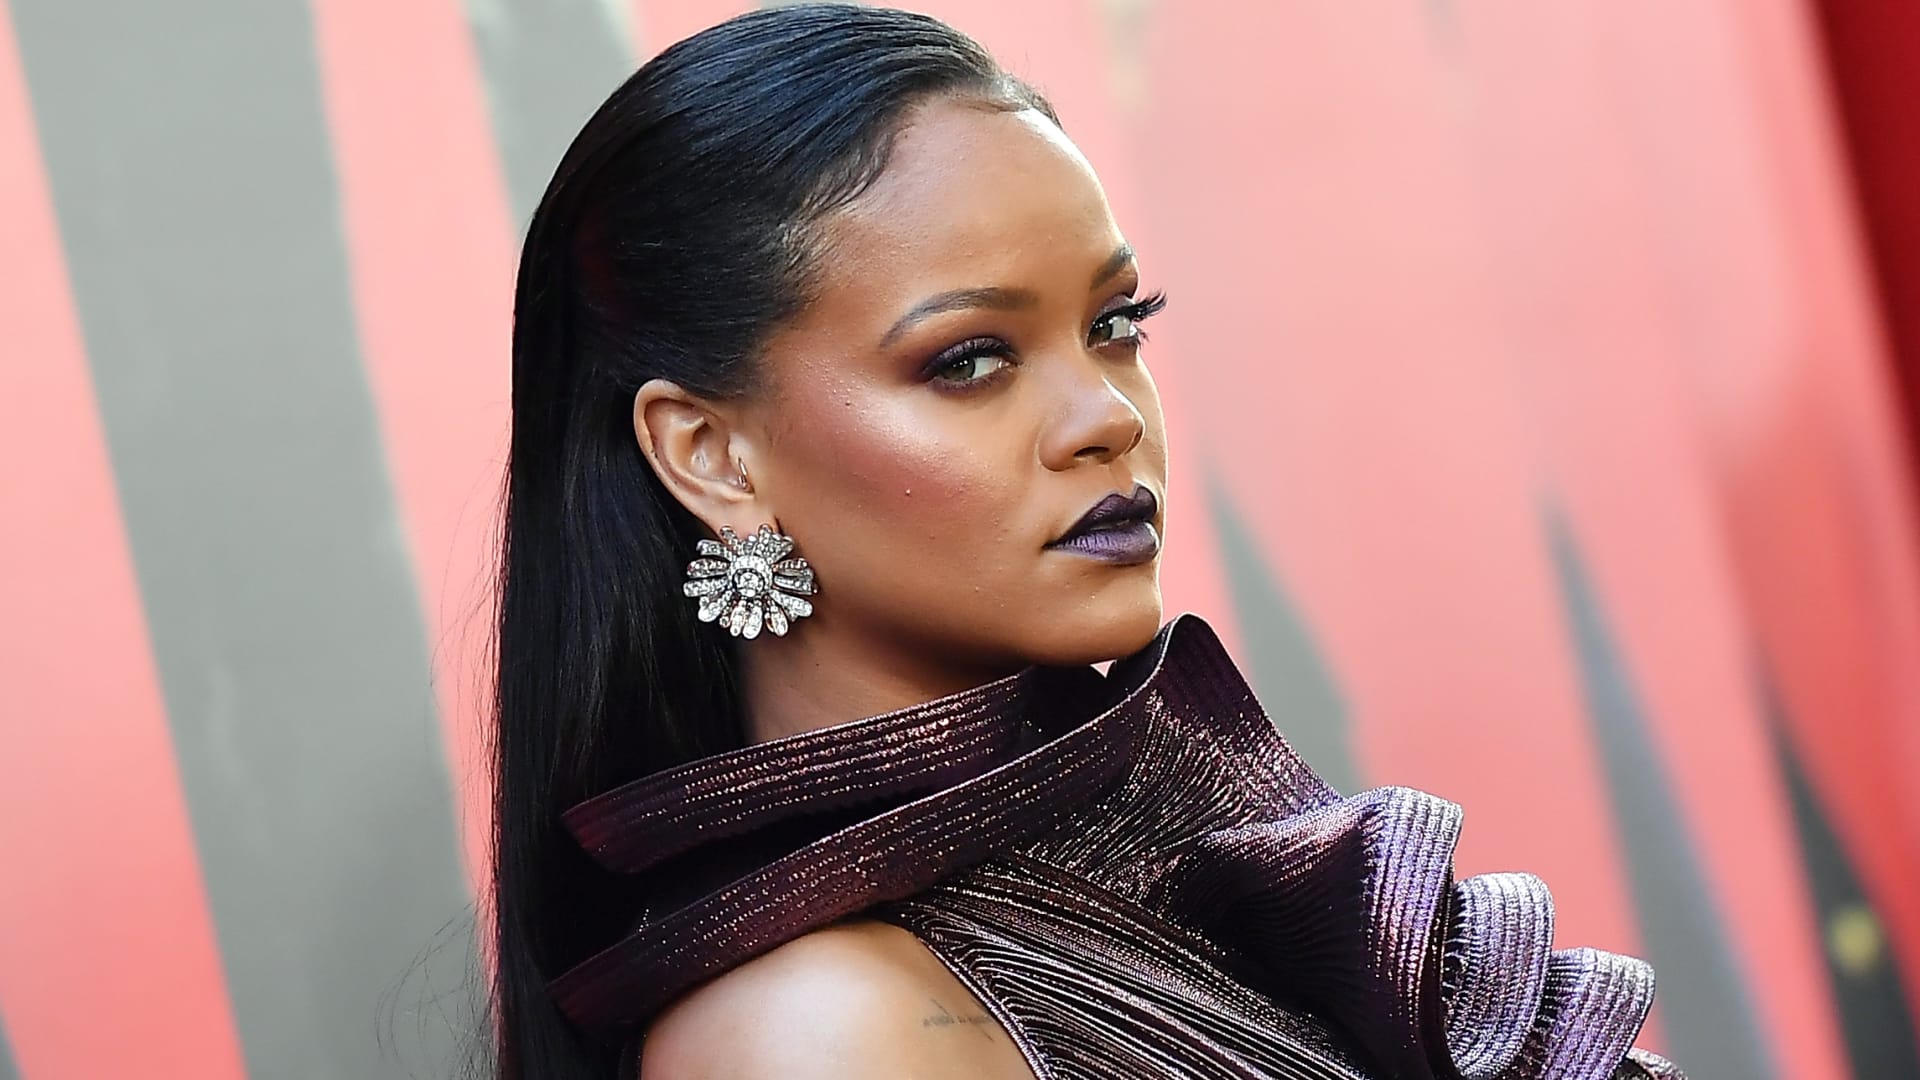 Rihanna to make long-awaited return to music with 'Black Panther' movie sequel